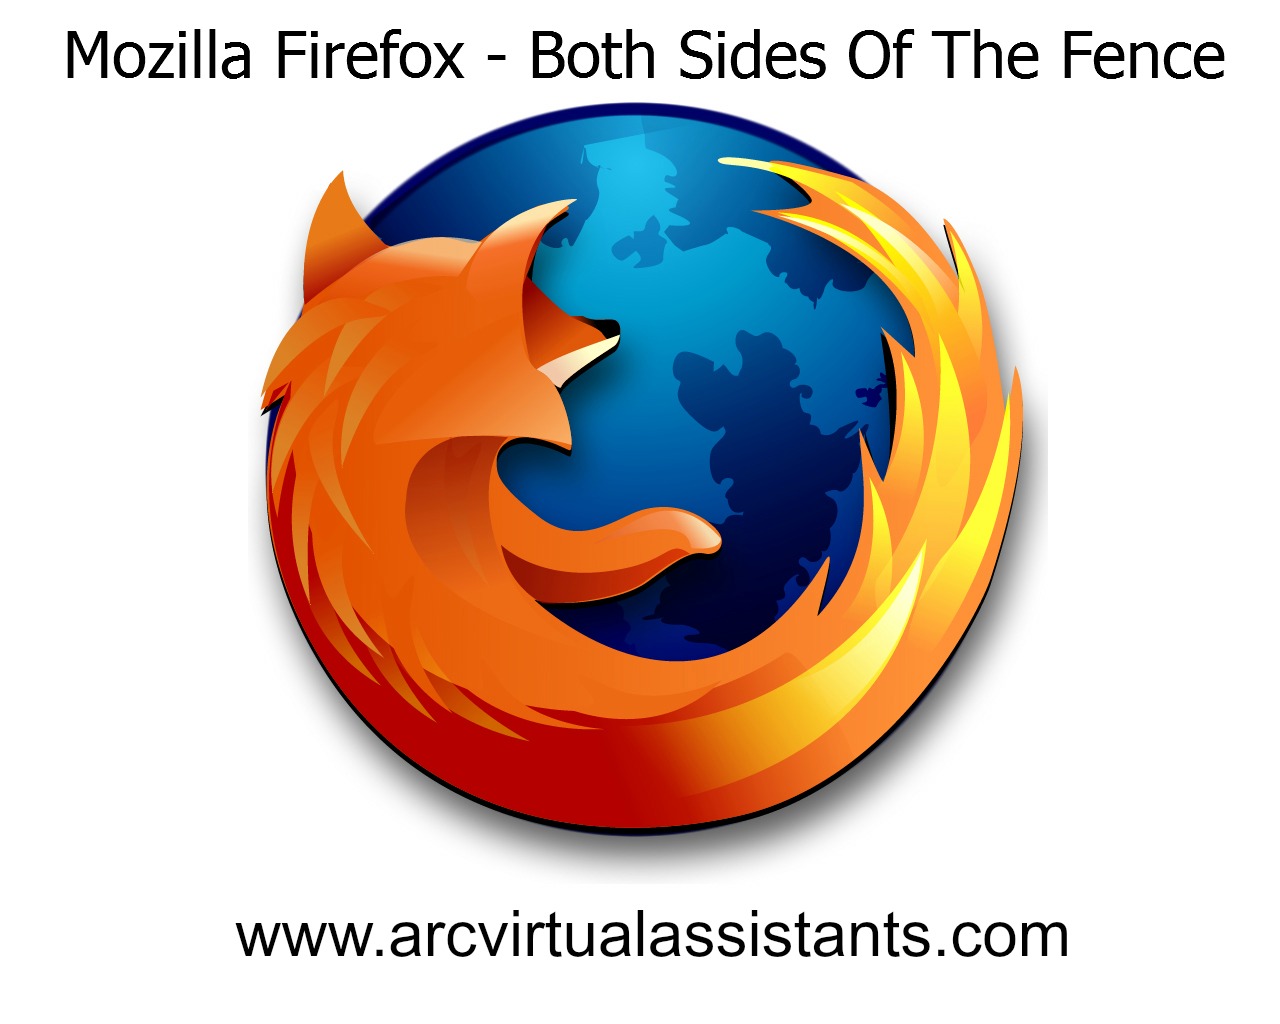 Resume interrupted download firefox